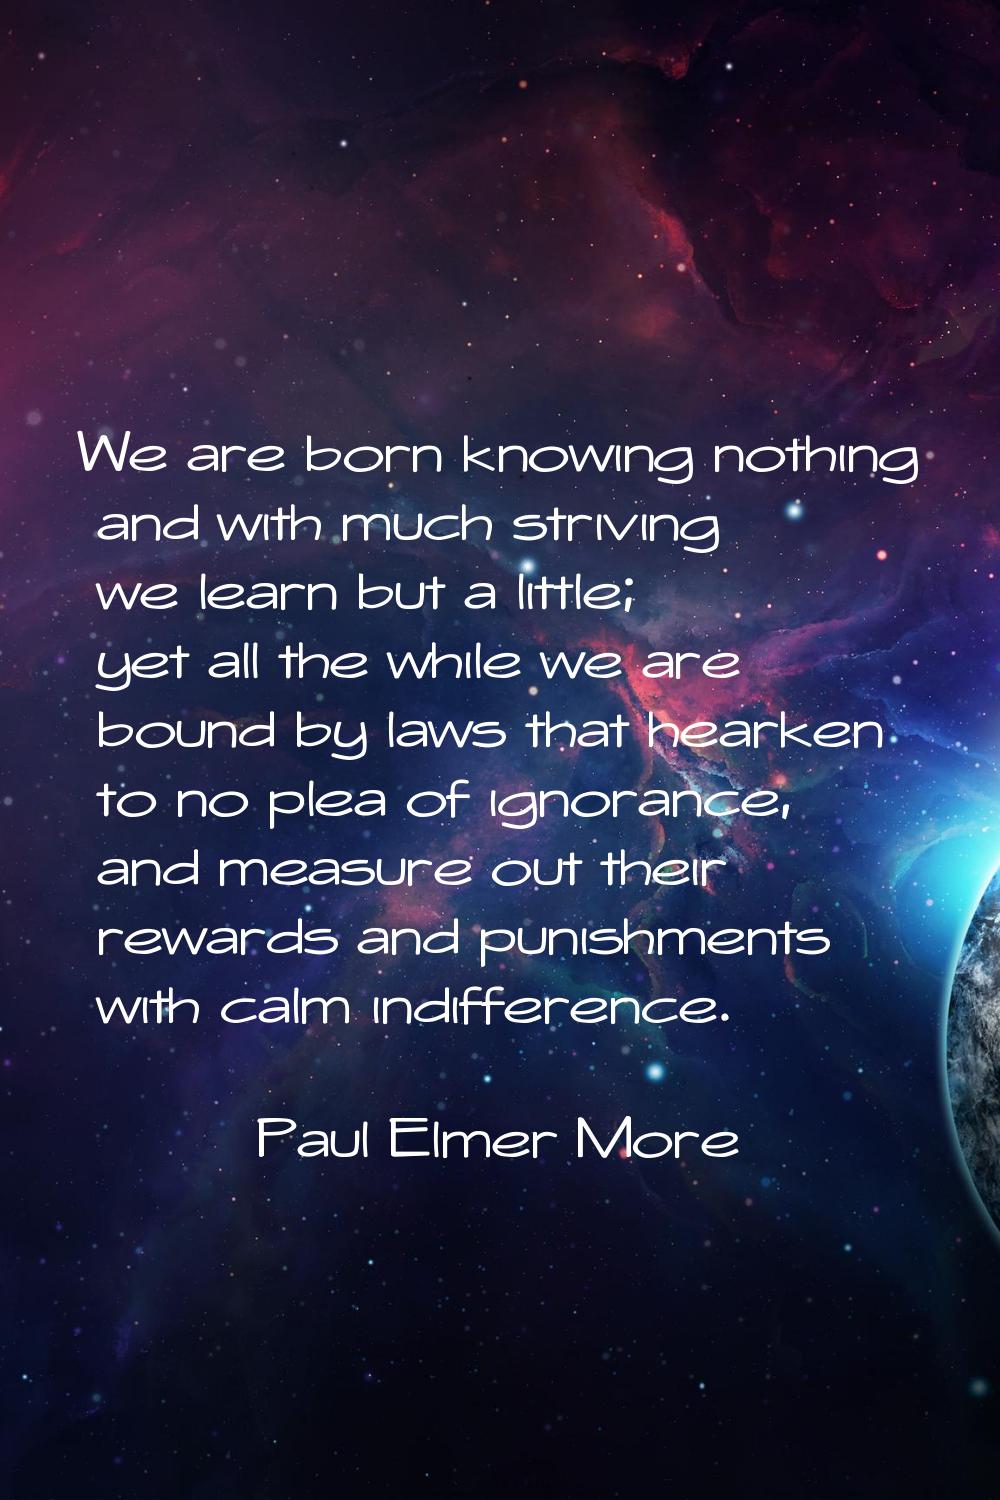 We are born knowing nothing and with much striving we learn but a little; yet all the while we are 